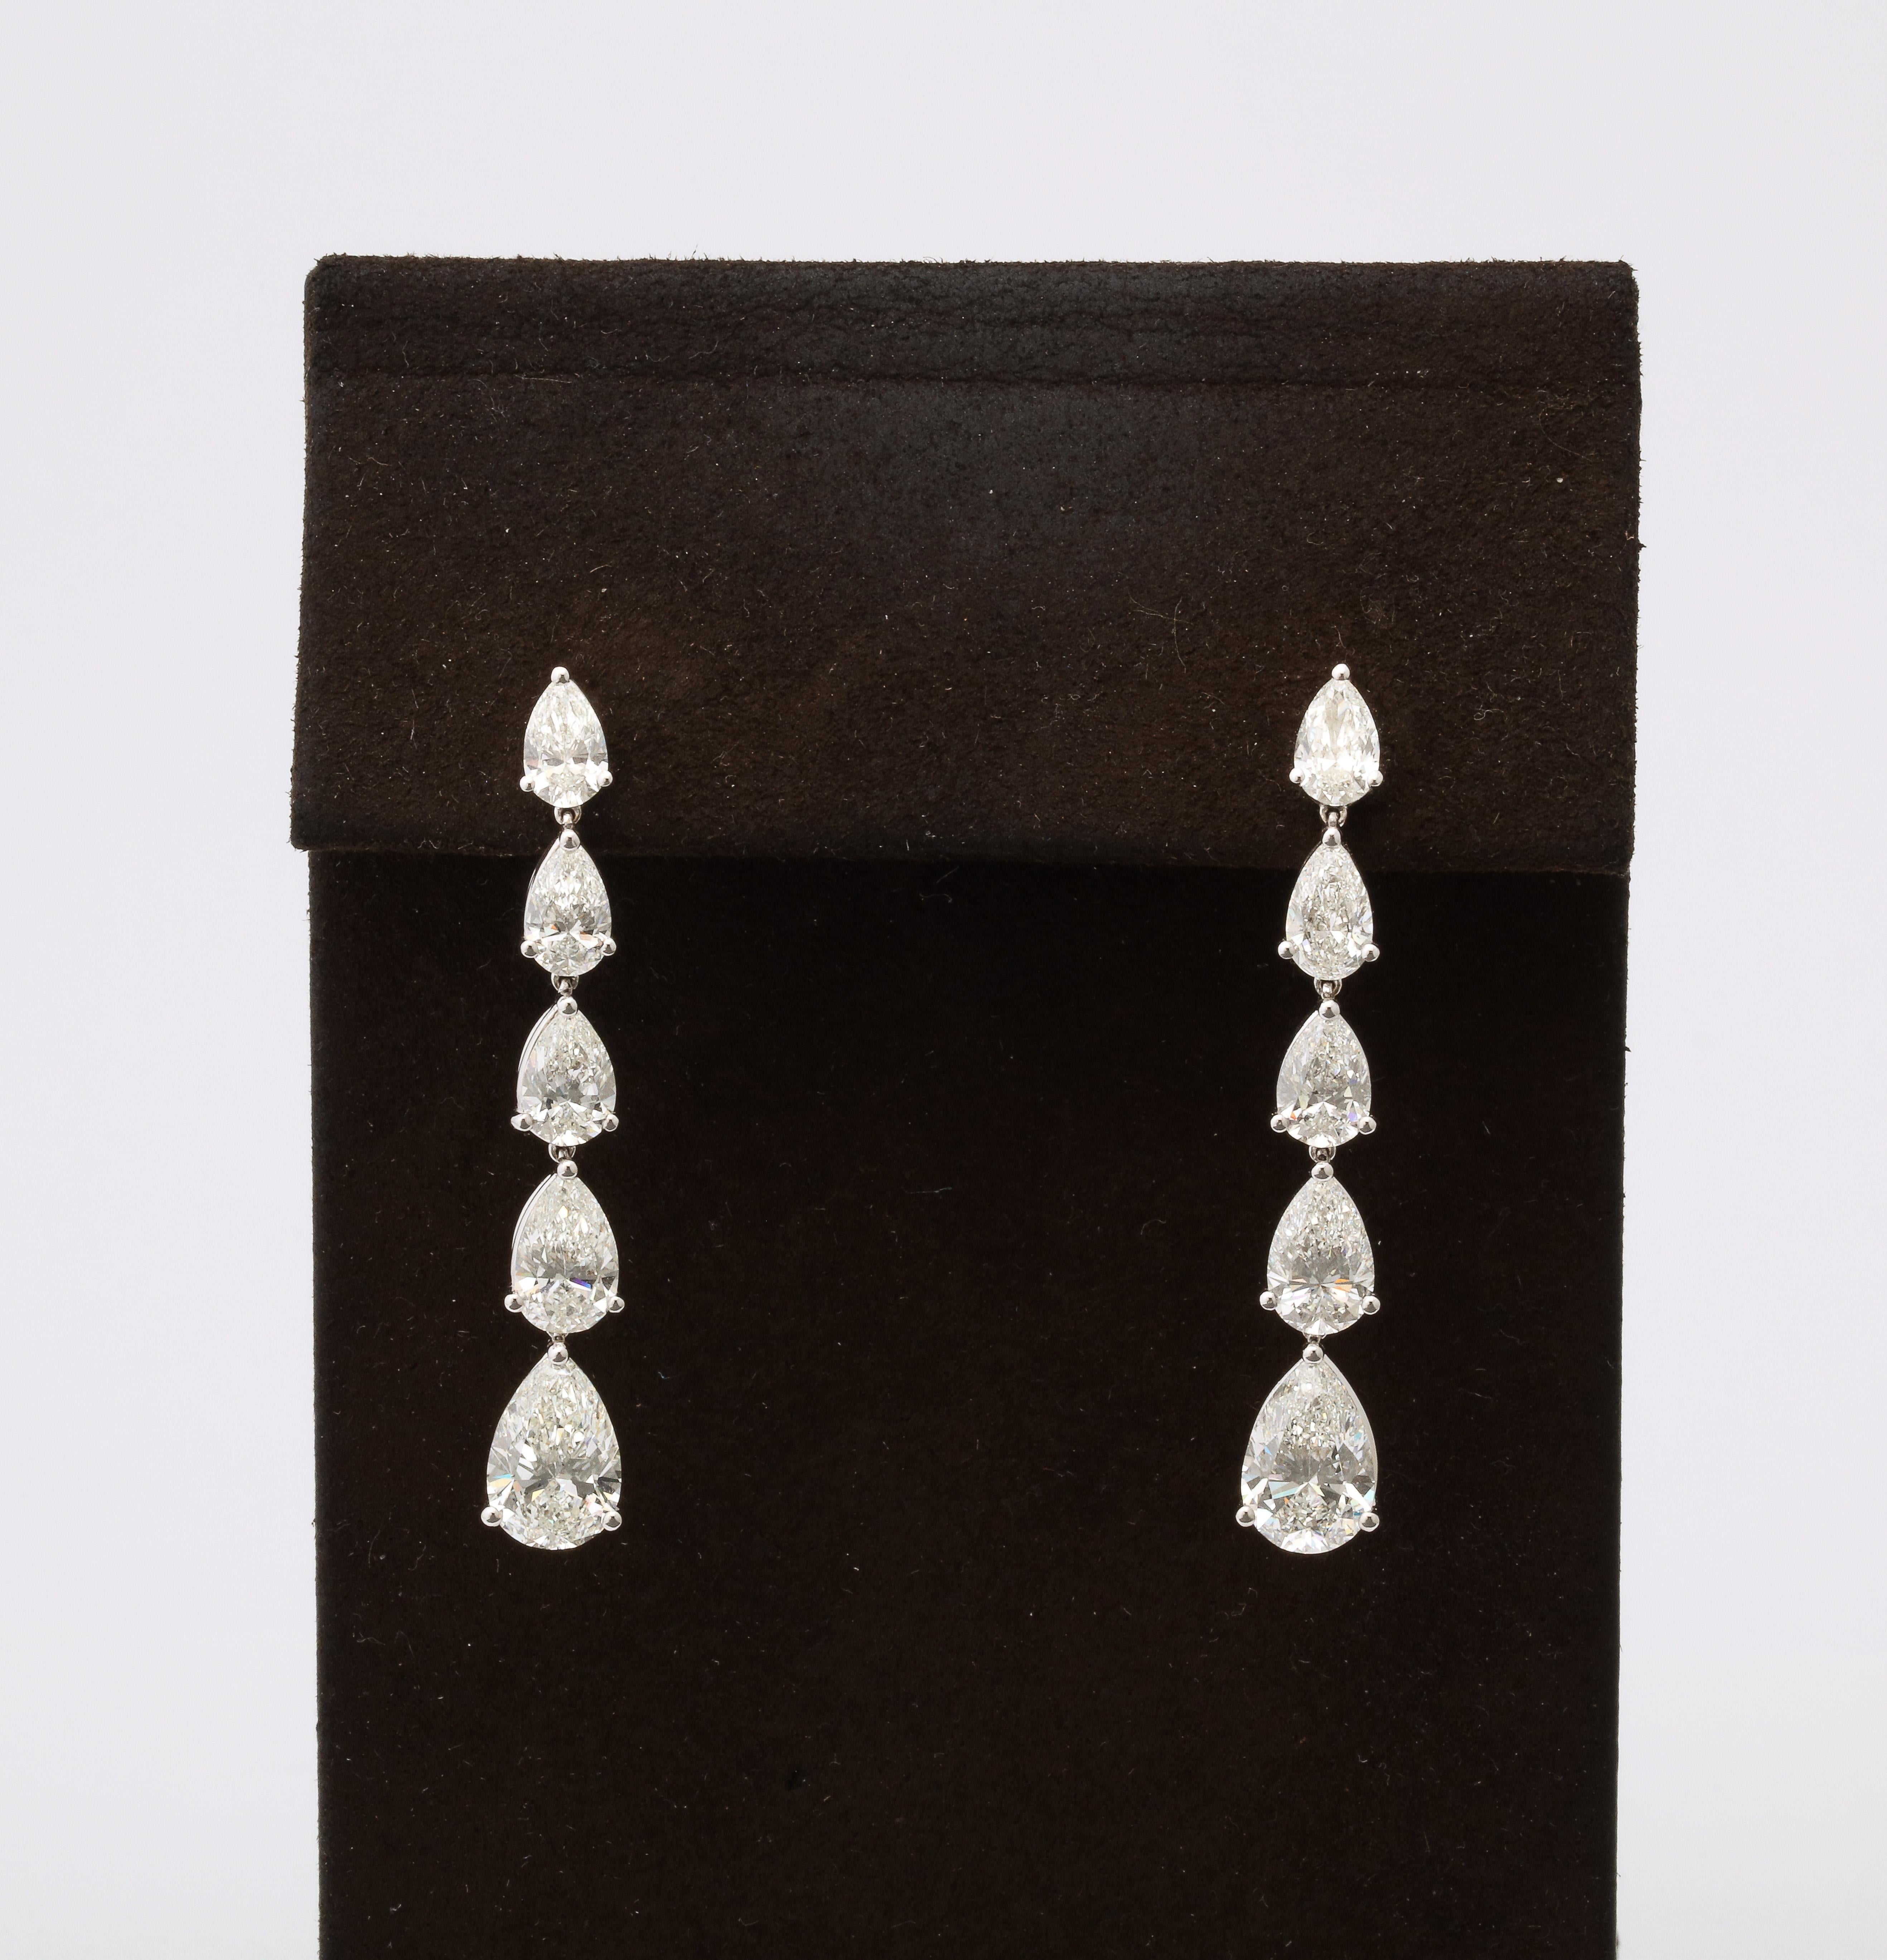 
A fabulous earring in a timeless design! 

9.51 total carats of white pear shaped diamonds with 2 carat each drops.  

18k white gold 

Approximately 1.80 inches in length. 

The perfect earring to add to anyones collection. 